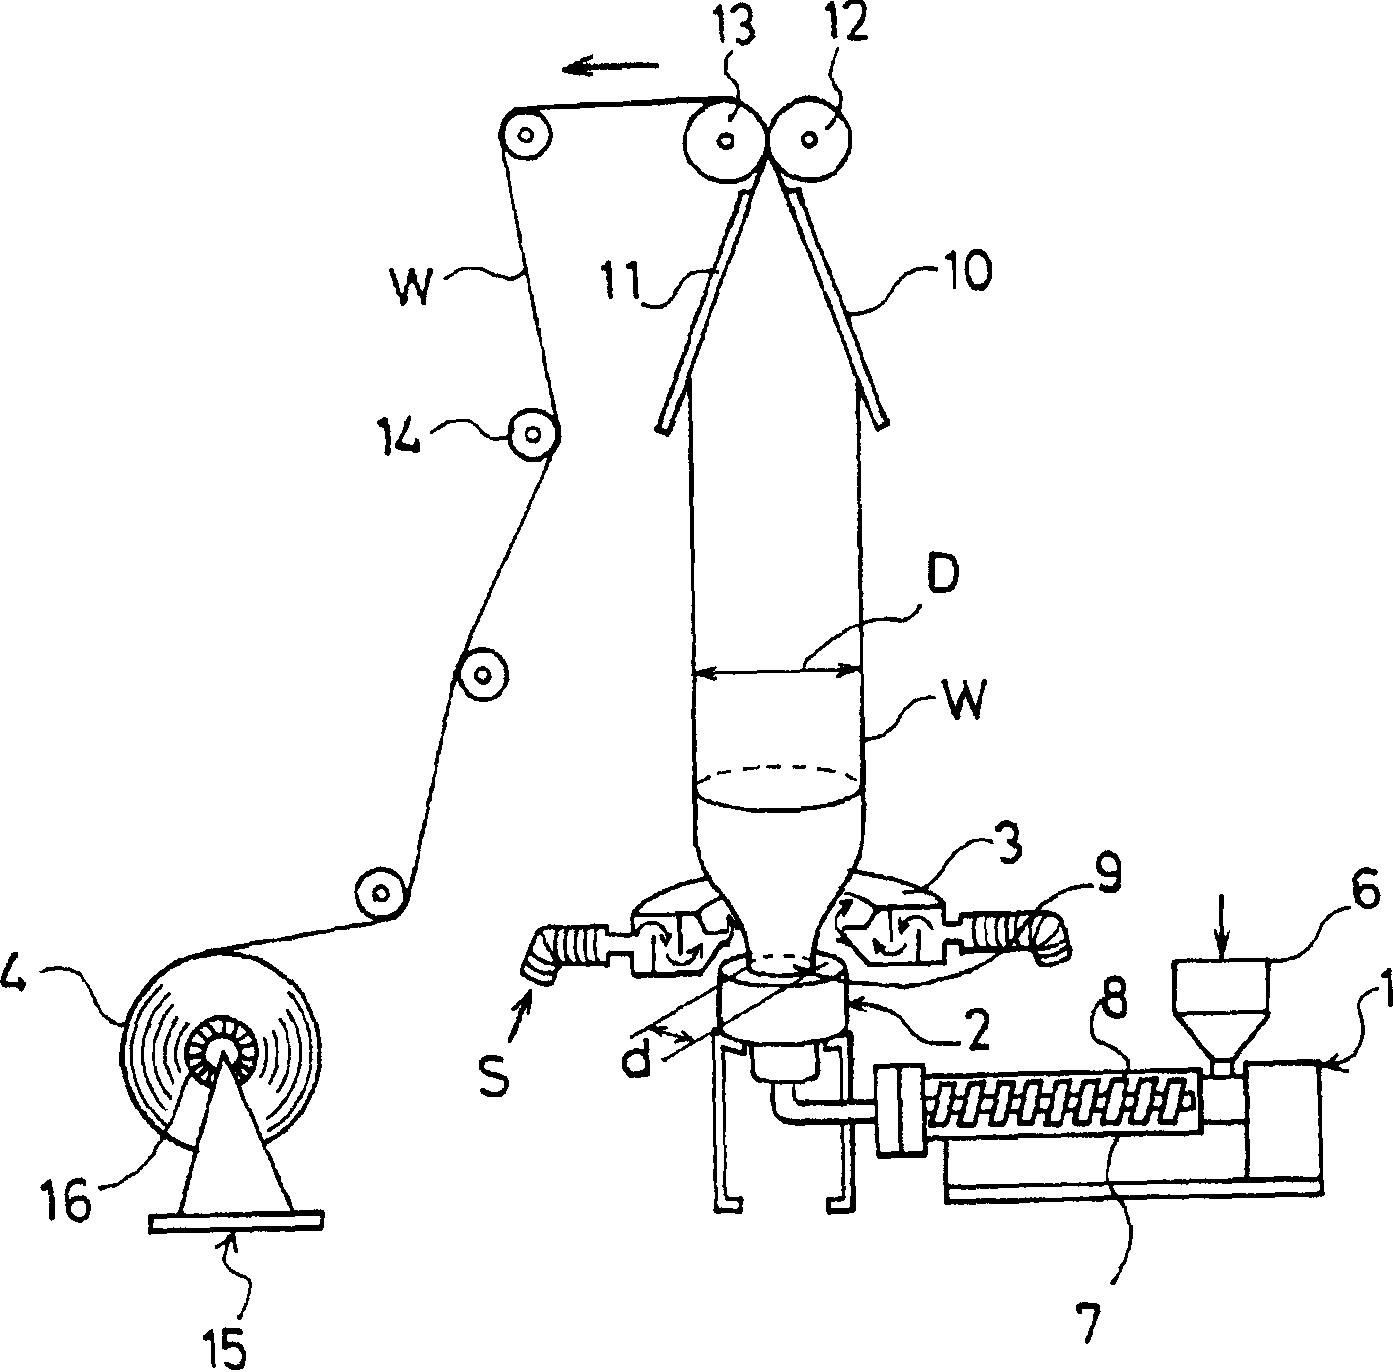 Method of feeding tire structure member